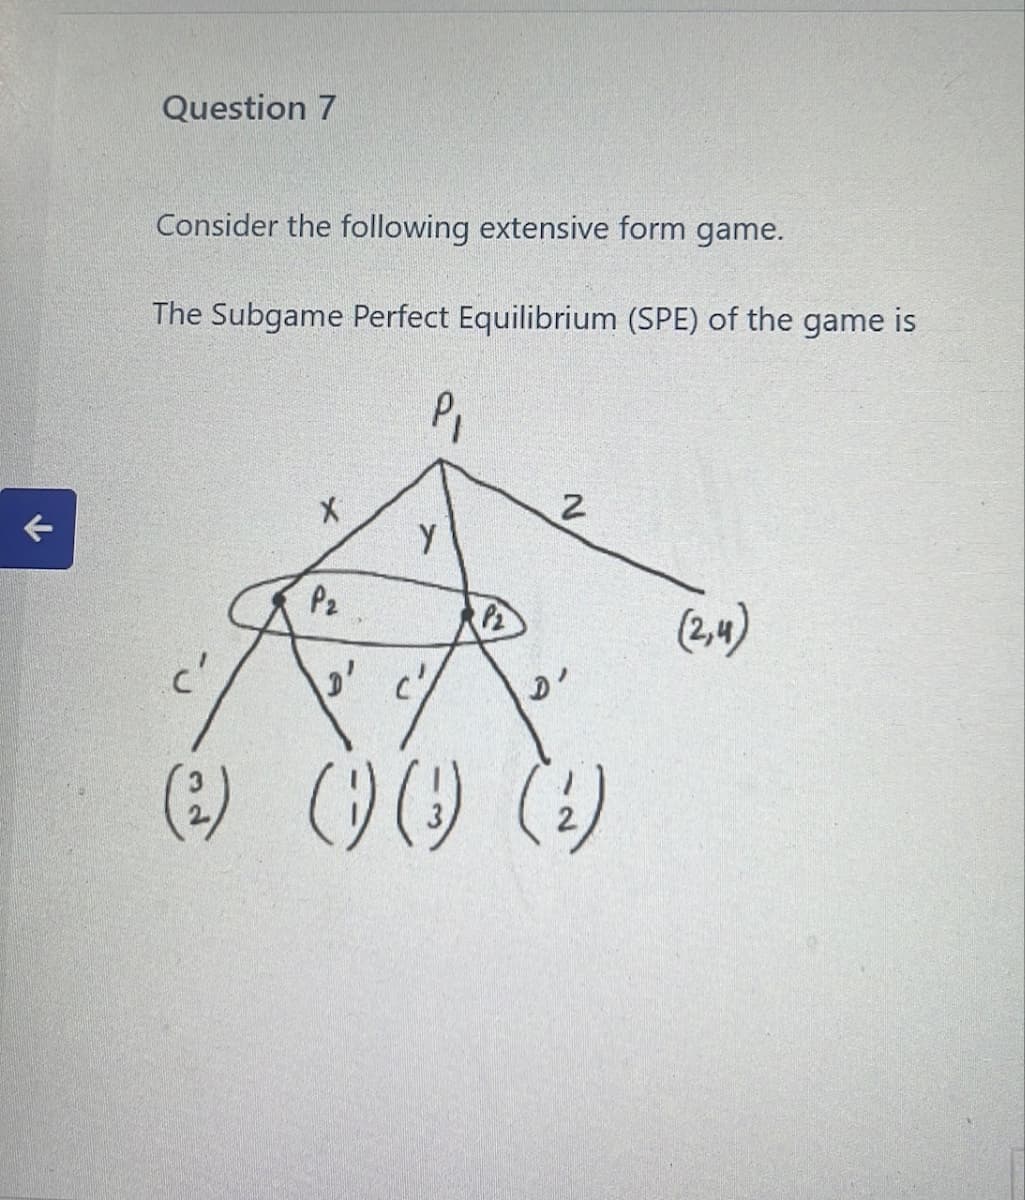 Question 7
Consider the following extensive form game.
The Subgame Perfect Equilibrium (SPE) of the game is
X
P2
Y
P₂
D' C'
N
c'
D'
(2) () ()
(1) (1) (2)
(2,4)